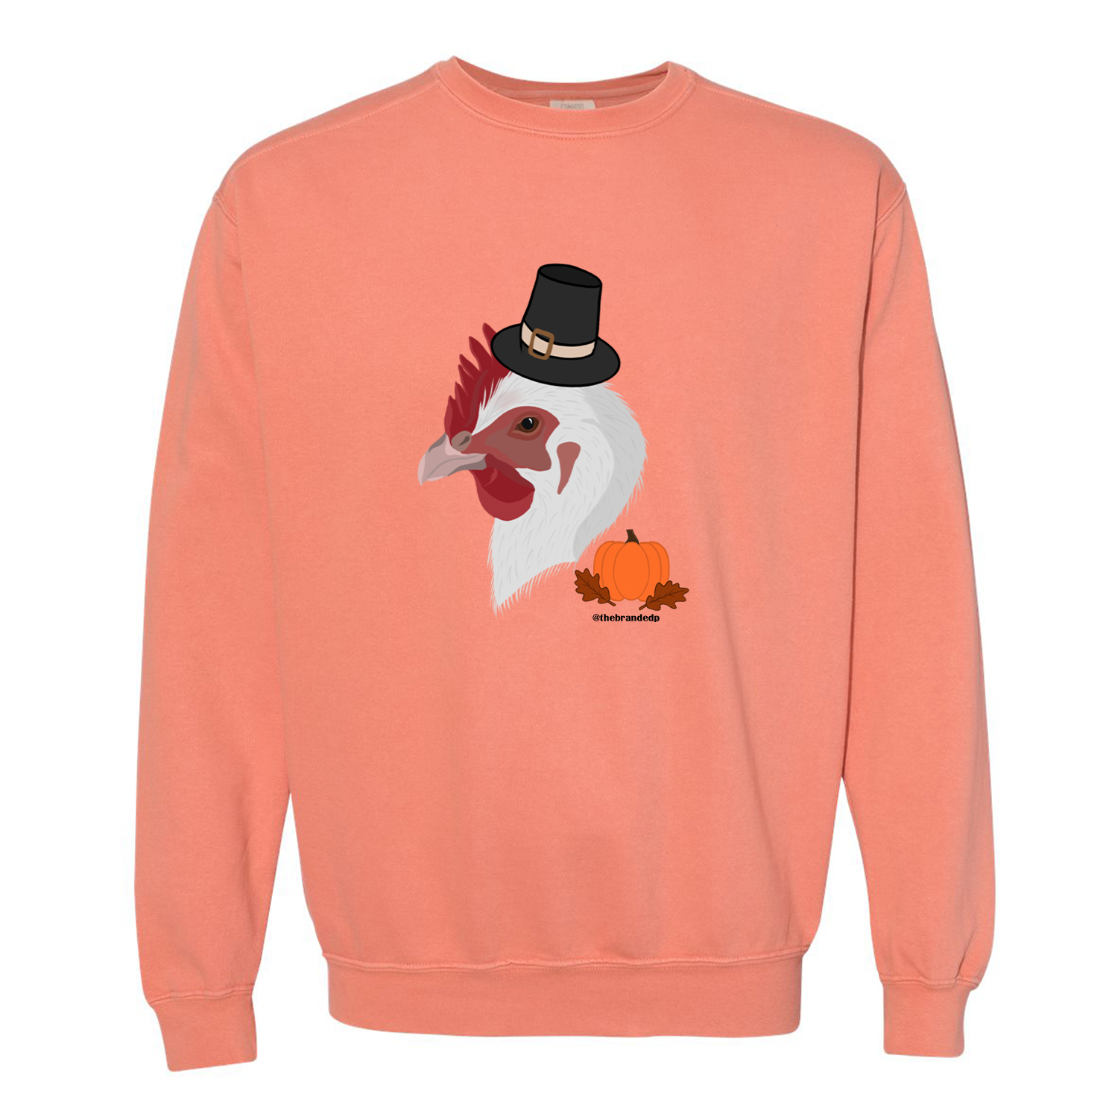 Fall Chicken Crewneck (S-3XL) - Multiple Colors!